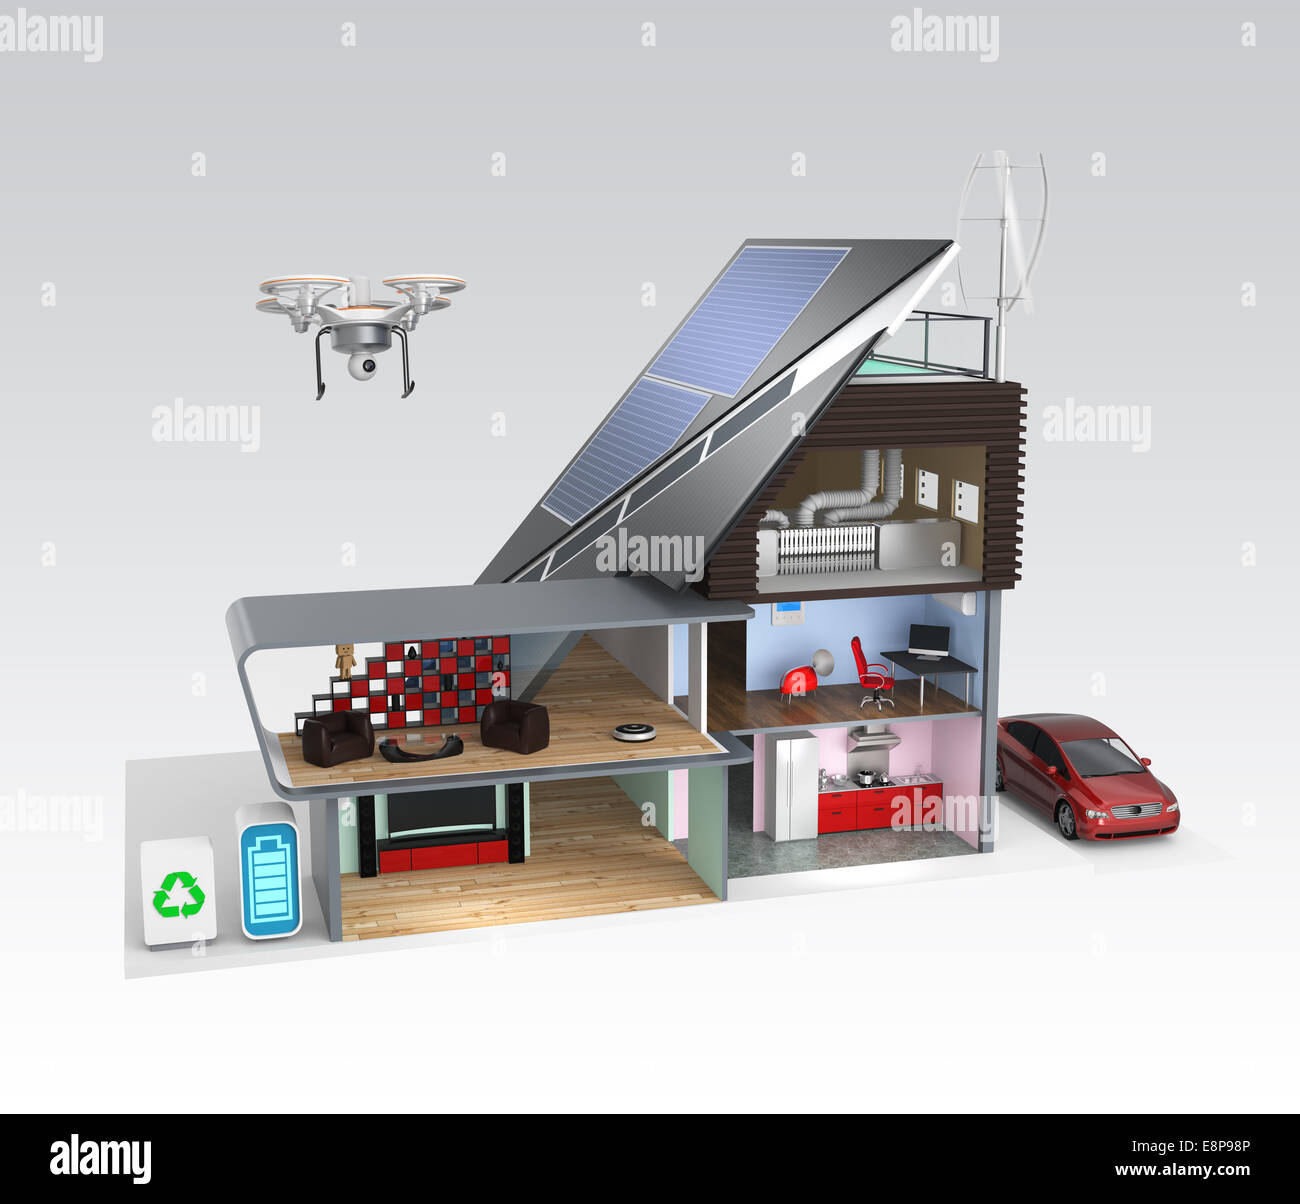 Smart house with energy efficient appliances, solar panels and wind turbines Stock Photo